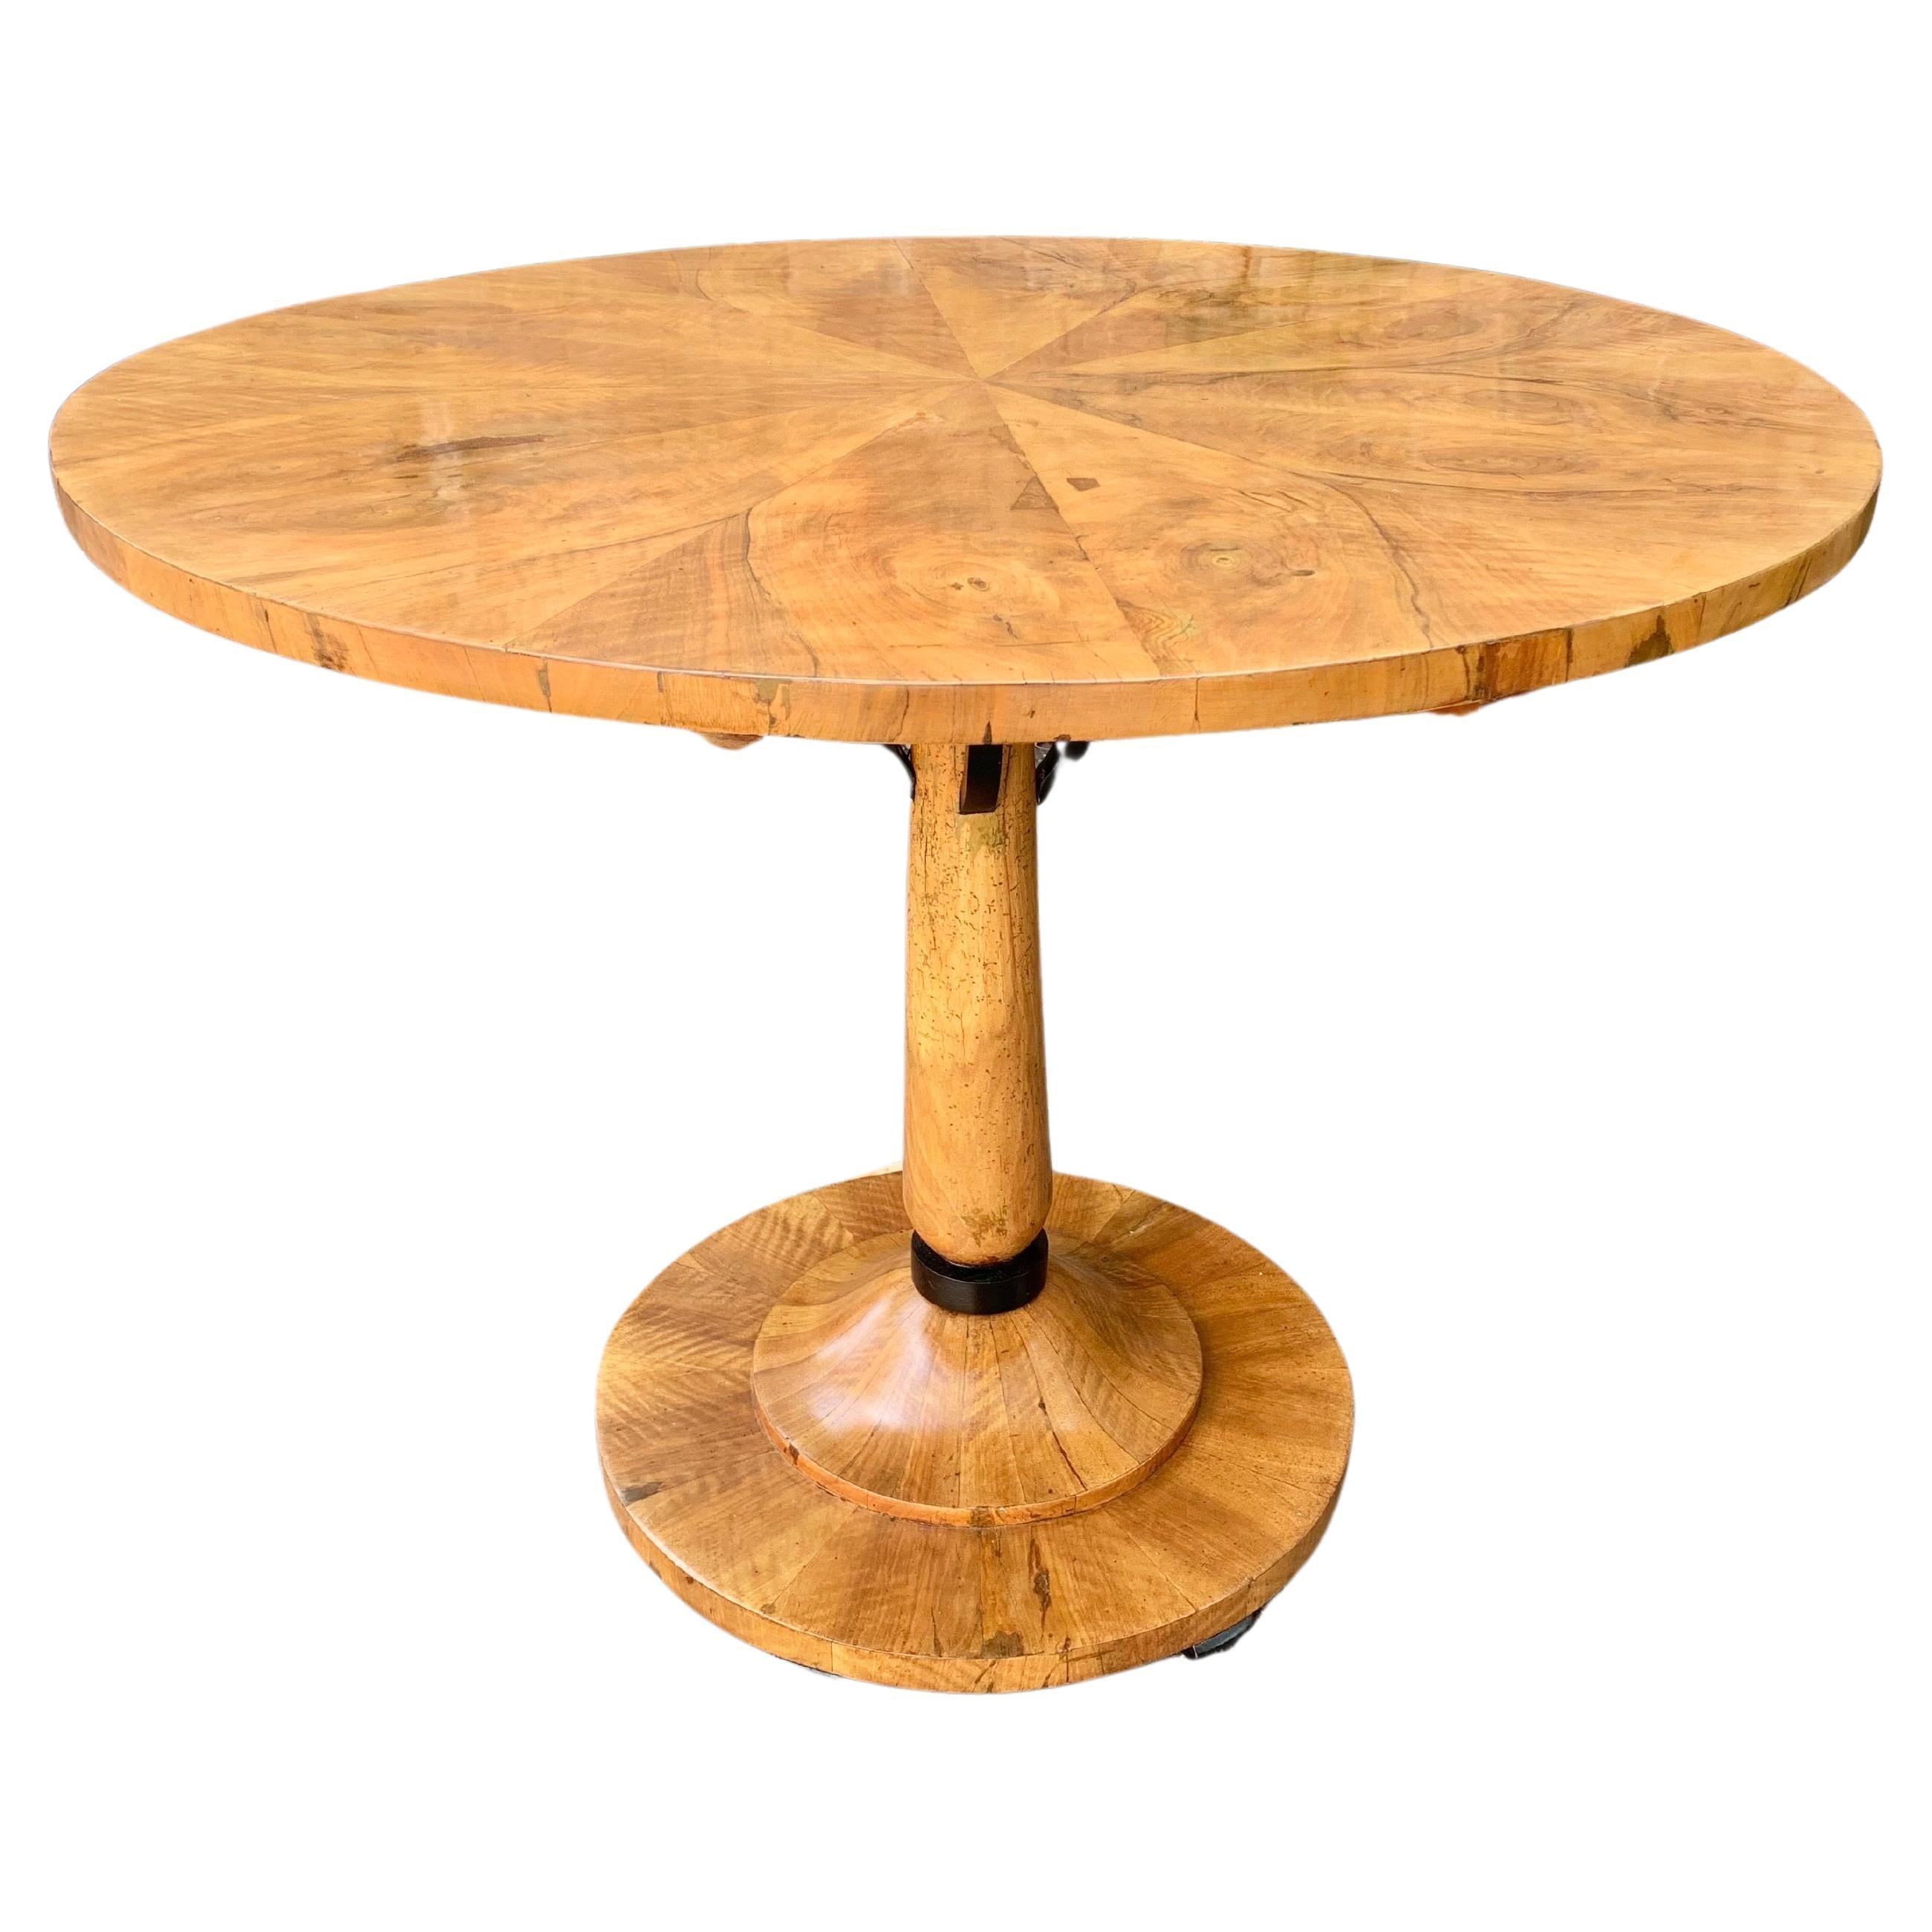 This stunning Biedermeir Pedestal Table, was crafted by furniture artisans in the 19th Century. The table features a beautiful book matched walnut veneered top, pedestal base and rounded bottom resting on six ebonized feet. The piece is accented by